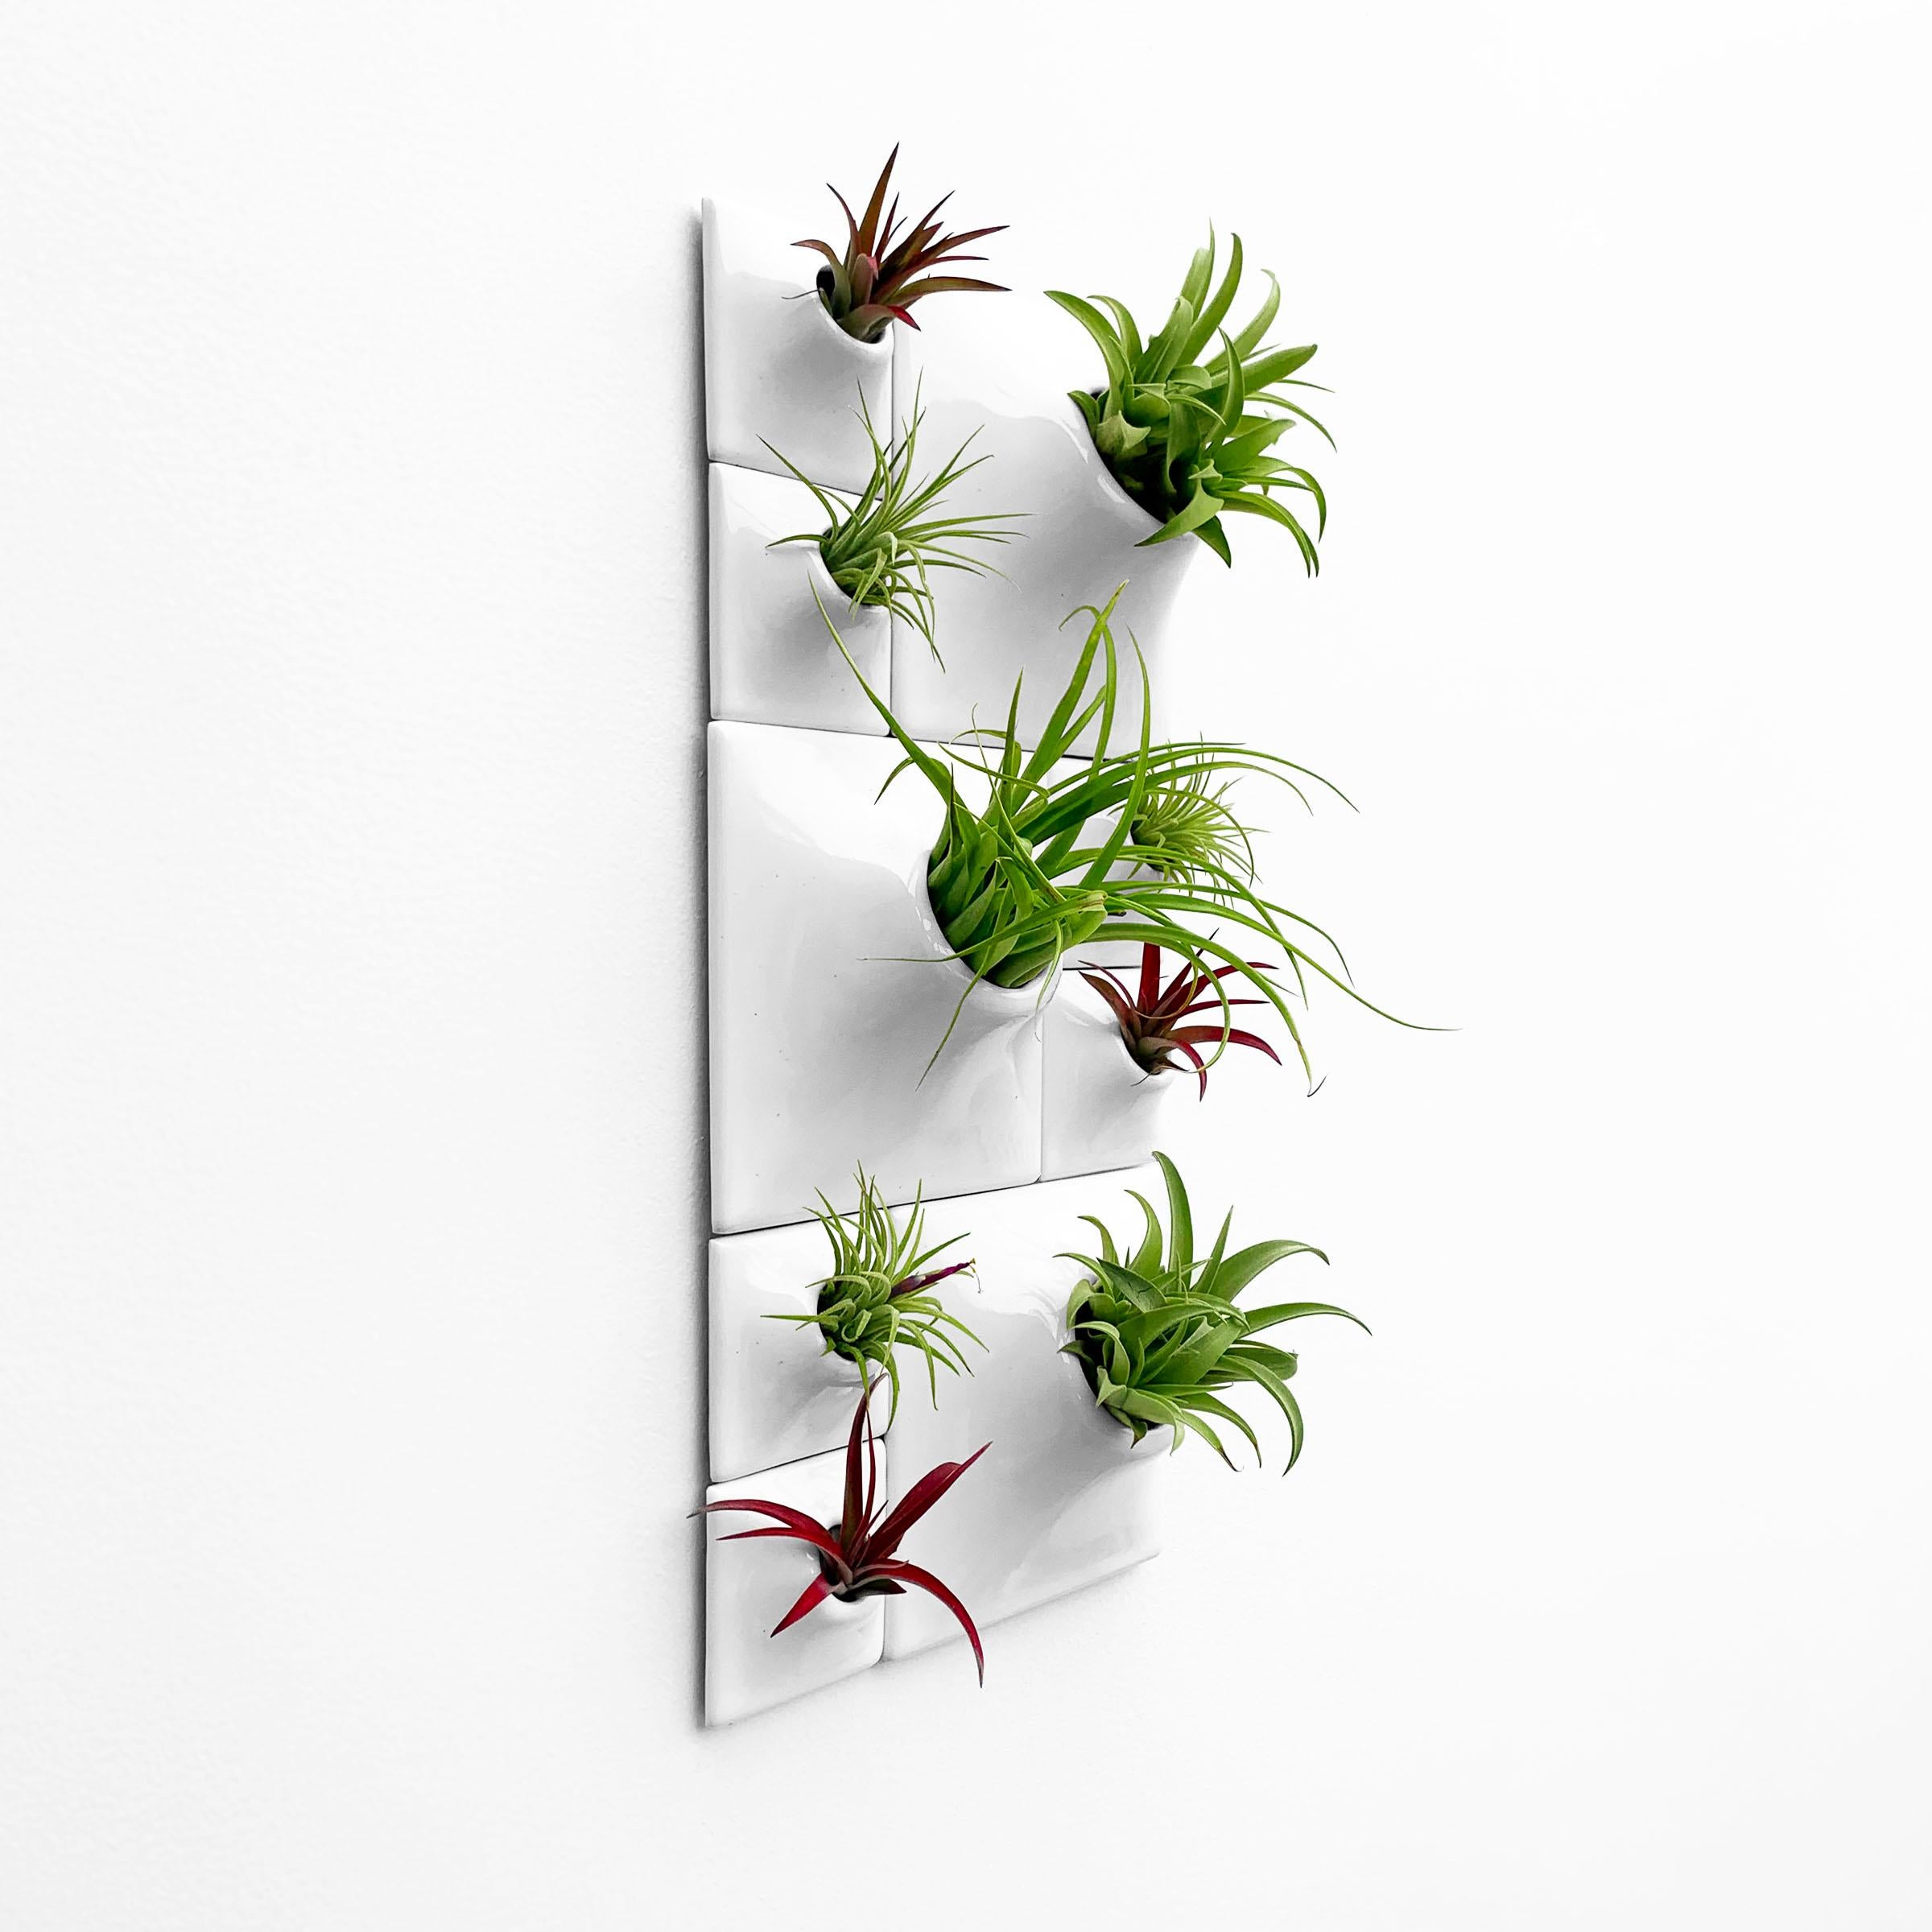 Modern White Wall Planter Set, Biophilic Wall Sculpture, Moss Wall Art, Node BR3 In New Condition For Sale In Bridgeport, PA